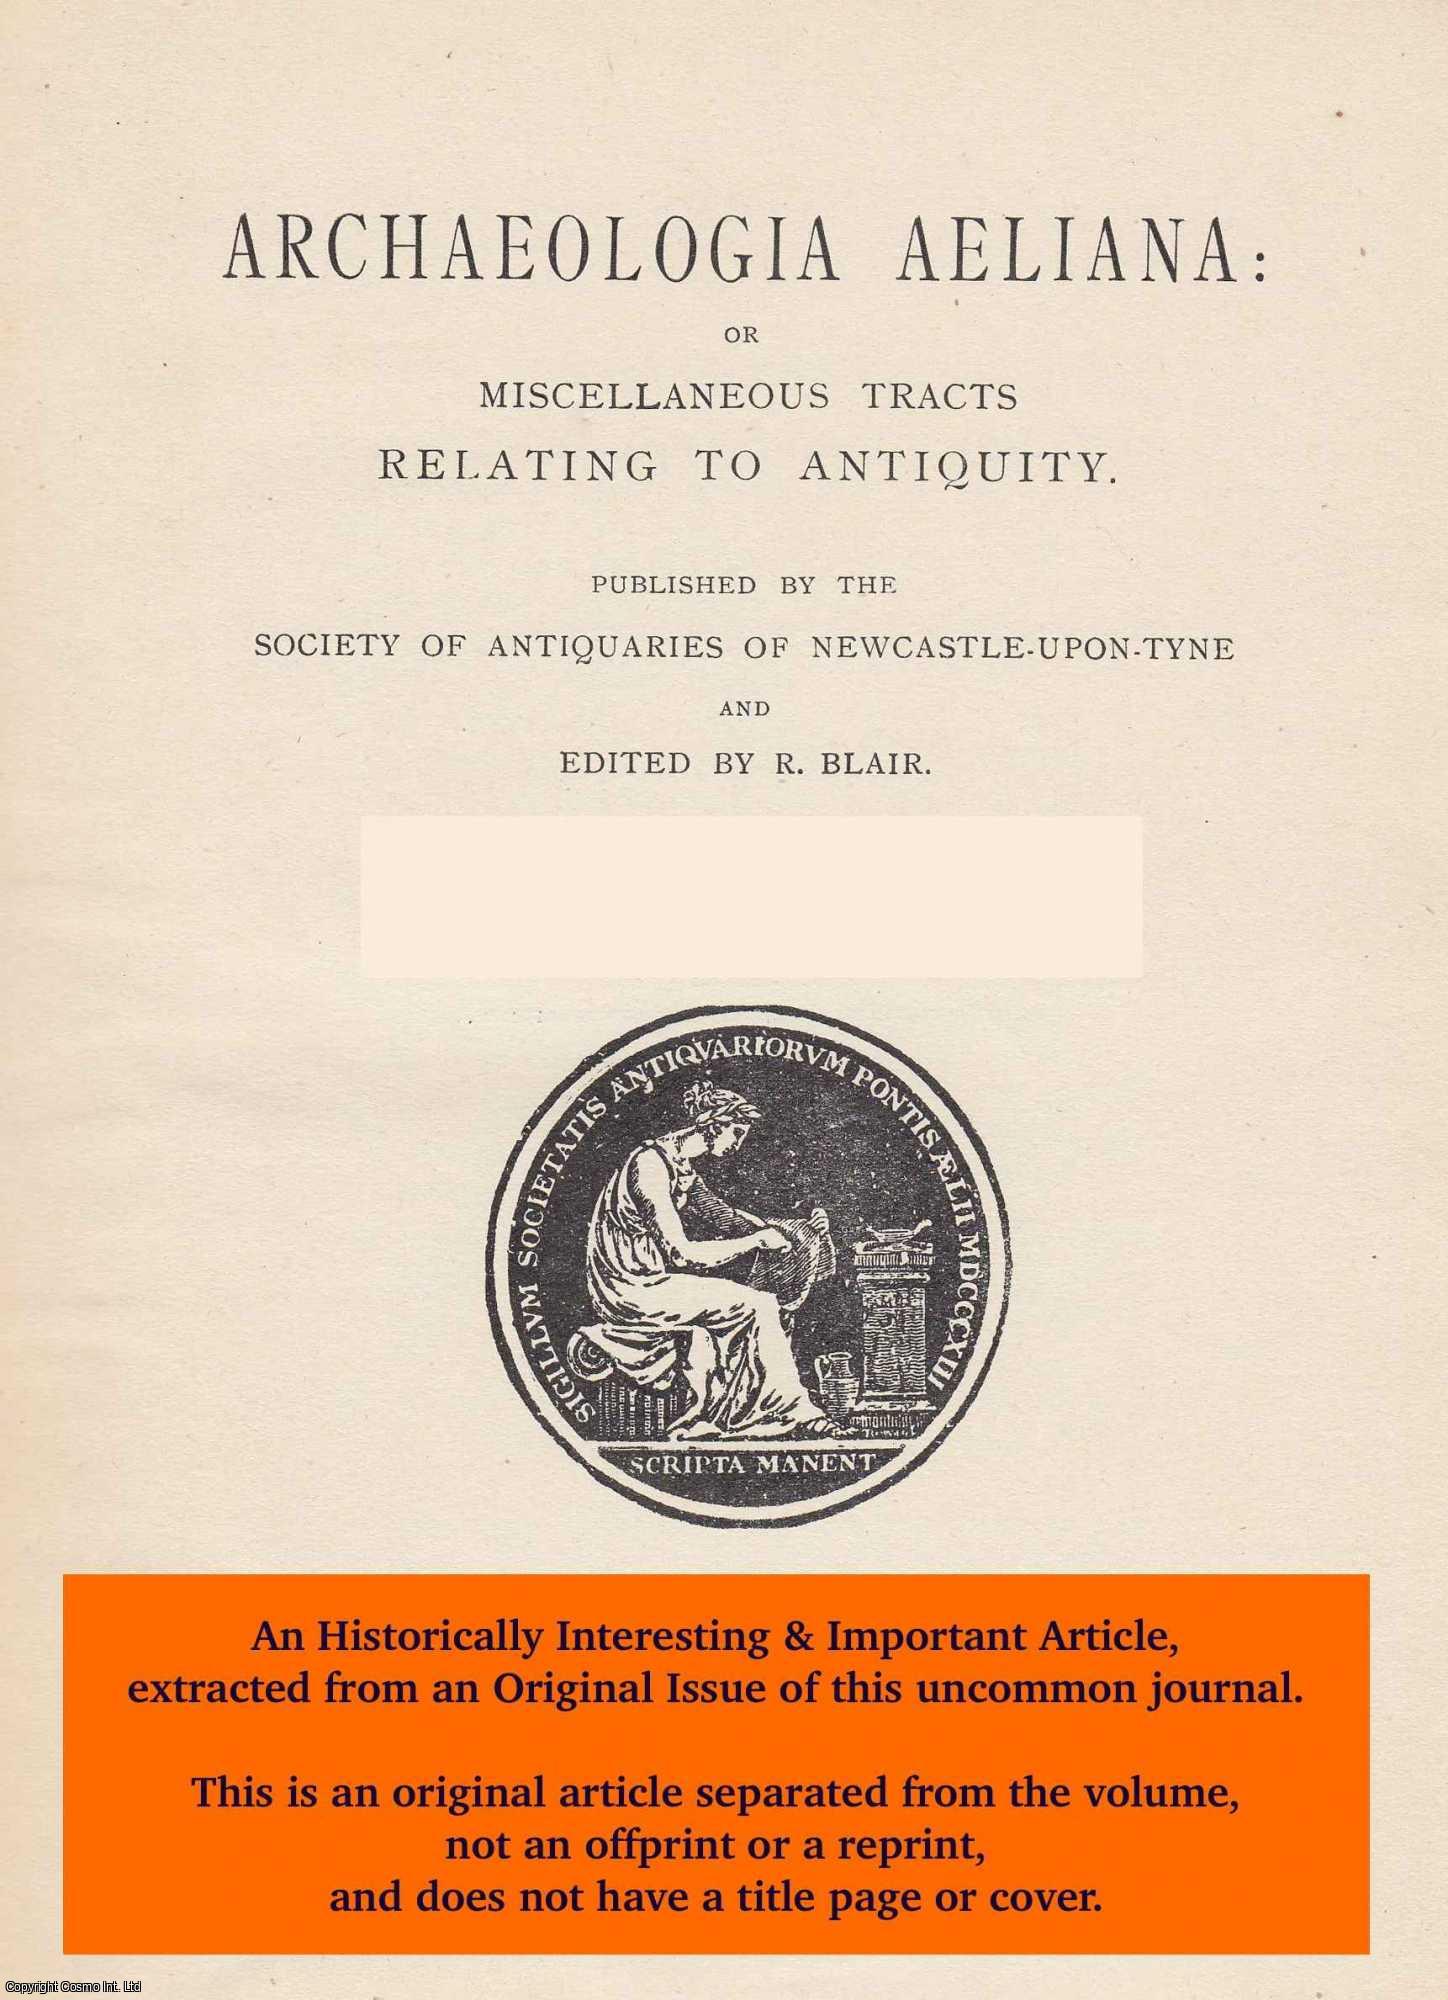 Matthew Culley, Matthew - Akeld Tower. An original article from The Archaeologia Aeliana: or Miscellaneous Tracts Relating to Antiquity, 1913.